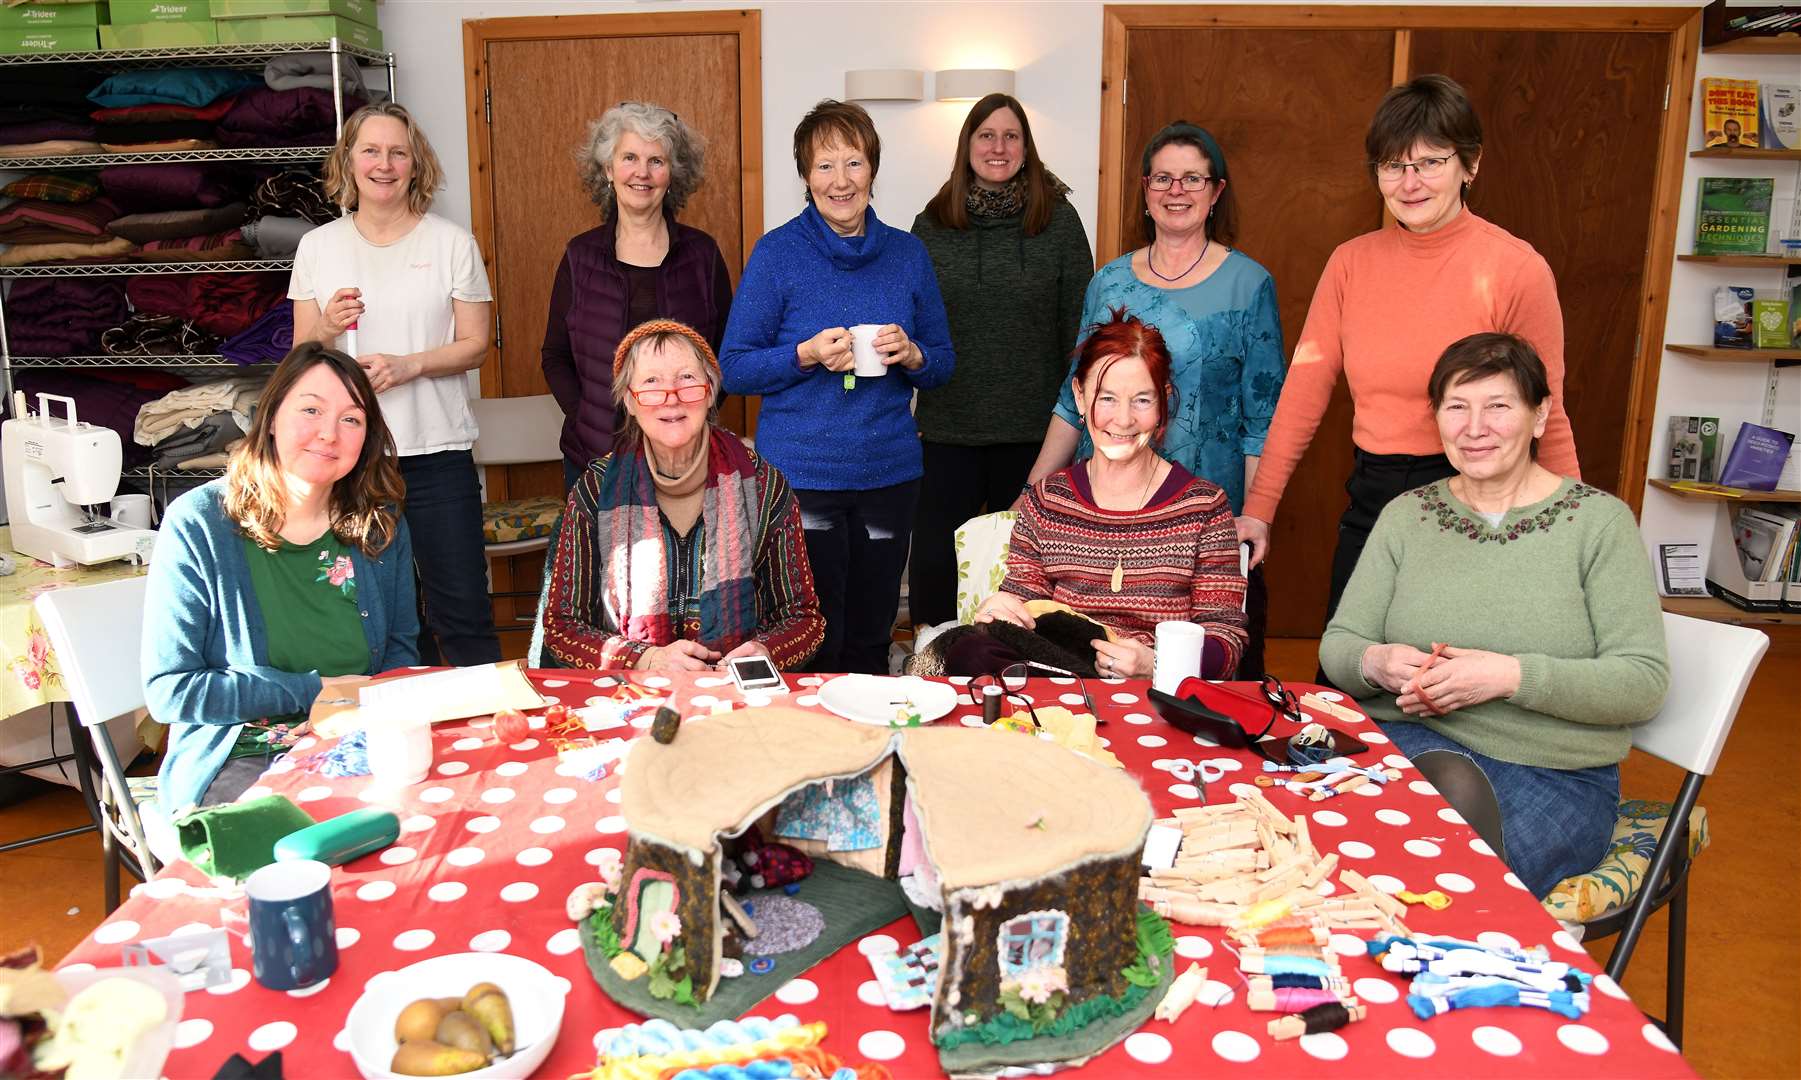 Many community groups are run at Transition Town Forres including 'Make and Mend'.